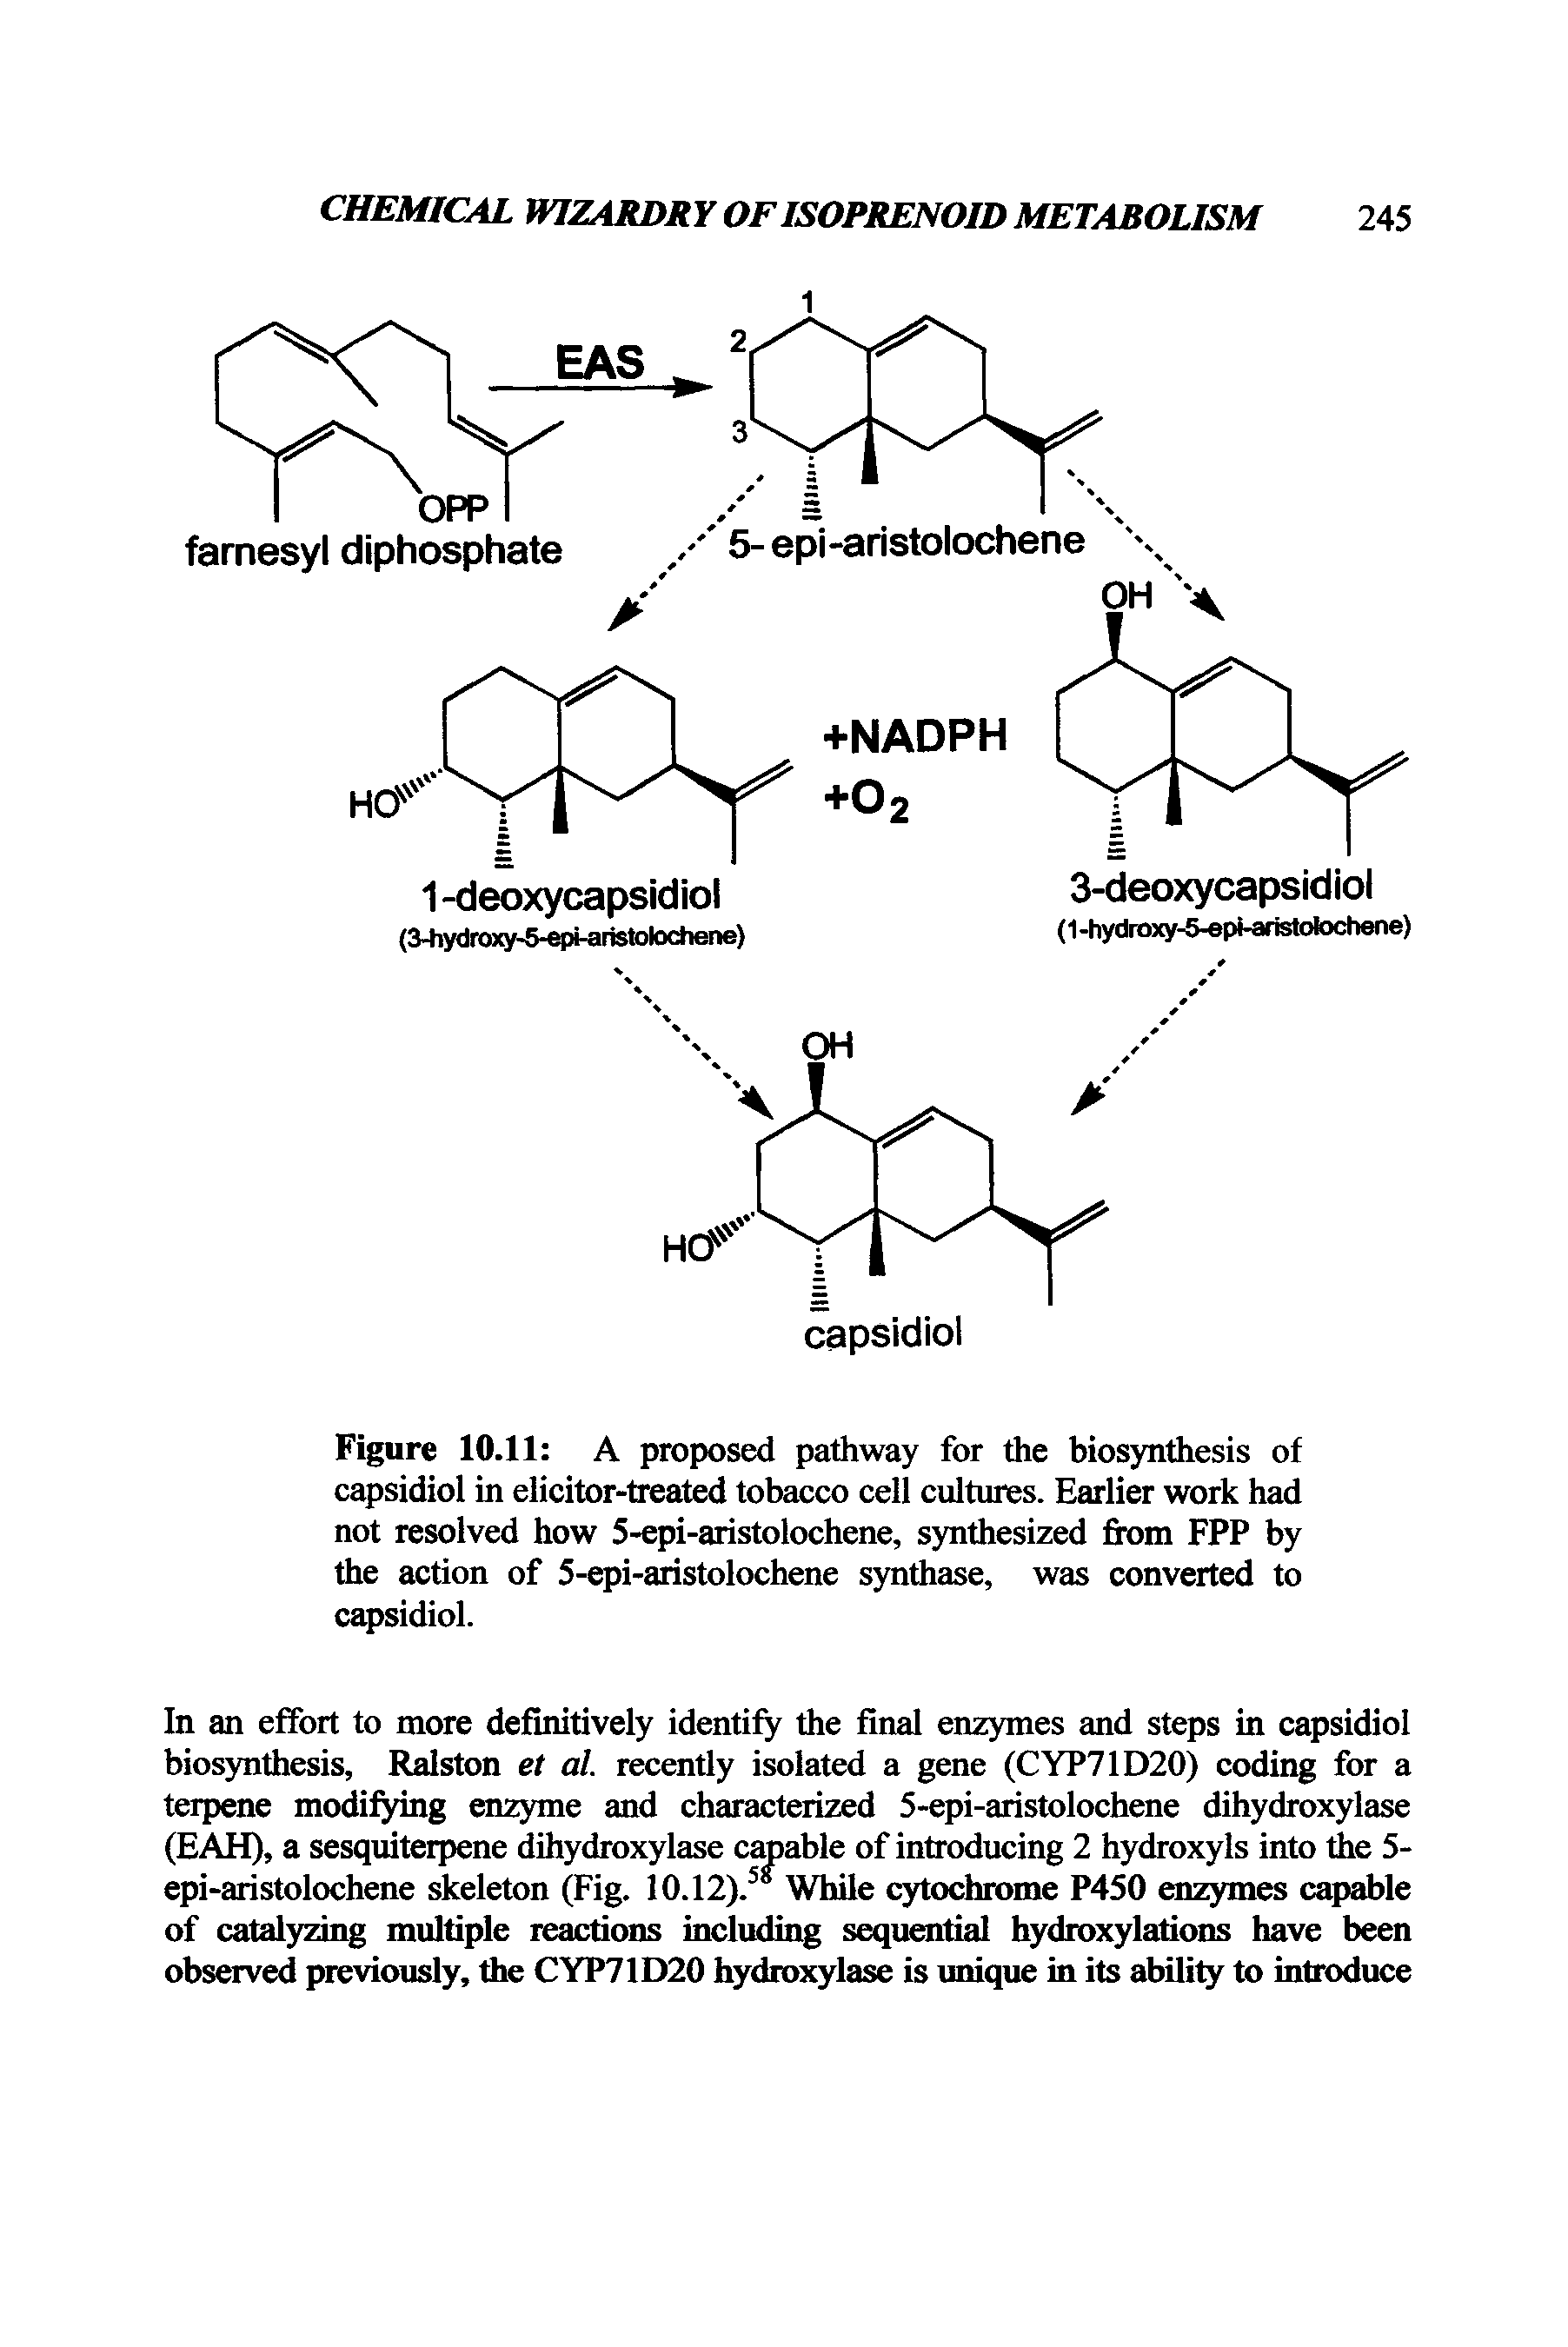 Figure 10.11 A proposed pathway for the biosynthesis of capsidiol in elicitor-treated tobacco cell cultures. Earlier work had not resolved how 5-epi-aristolochene, synthesized from FPP by the action of 5-epi-aristolochene synthase, was converted to capsidiol.